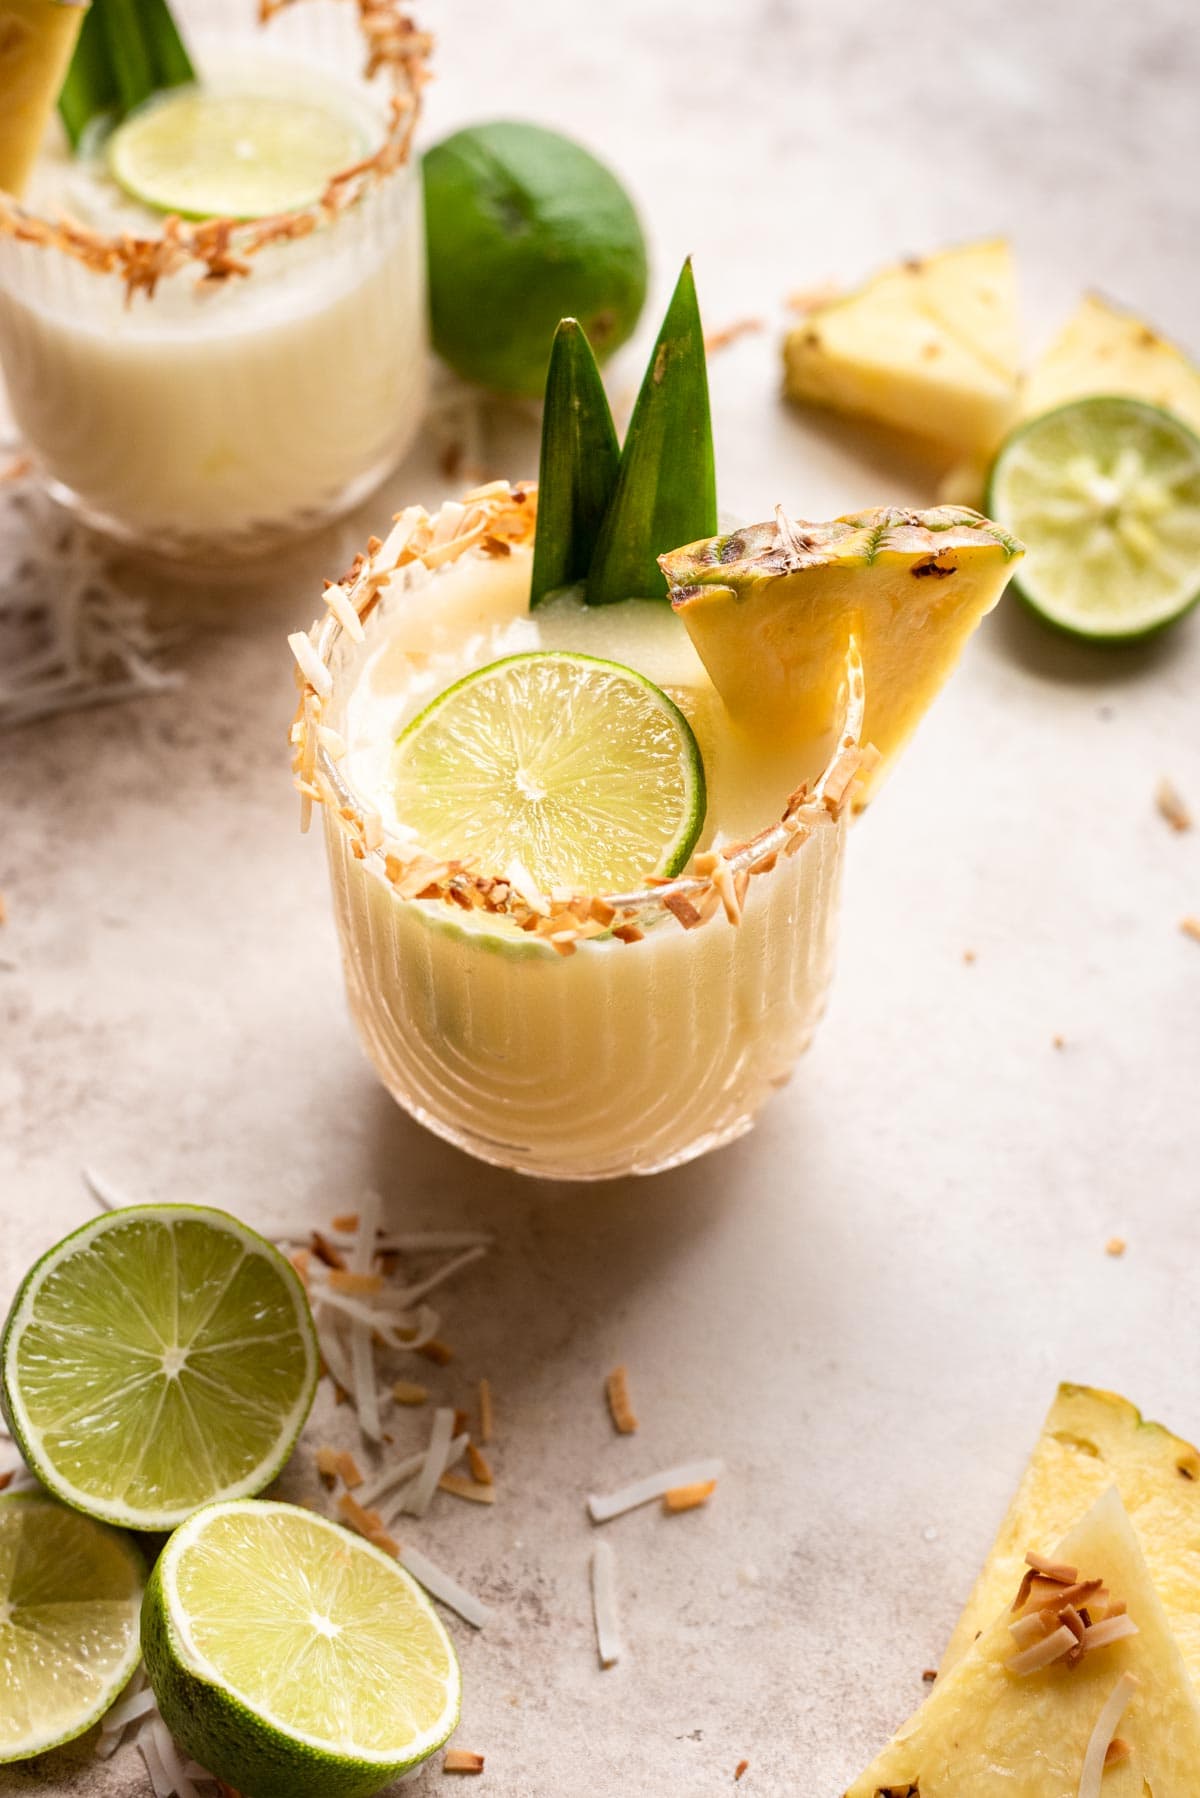 Pineapple coconut margarita garnished with pineapple, lime, and pineapple leafs on a brown table.